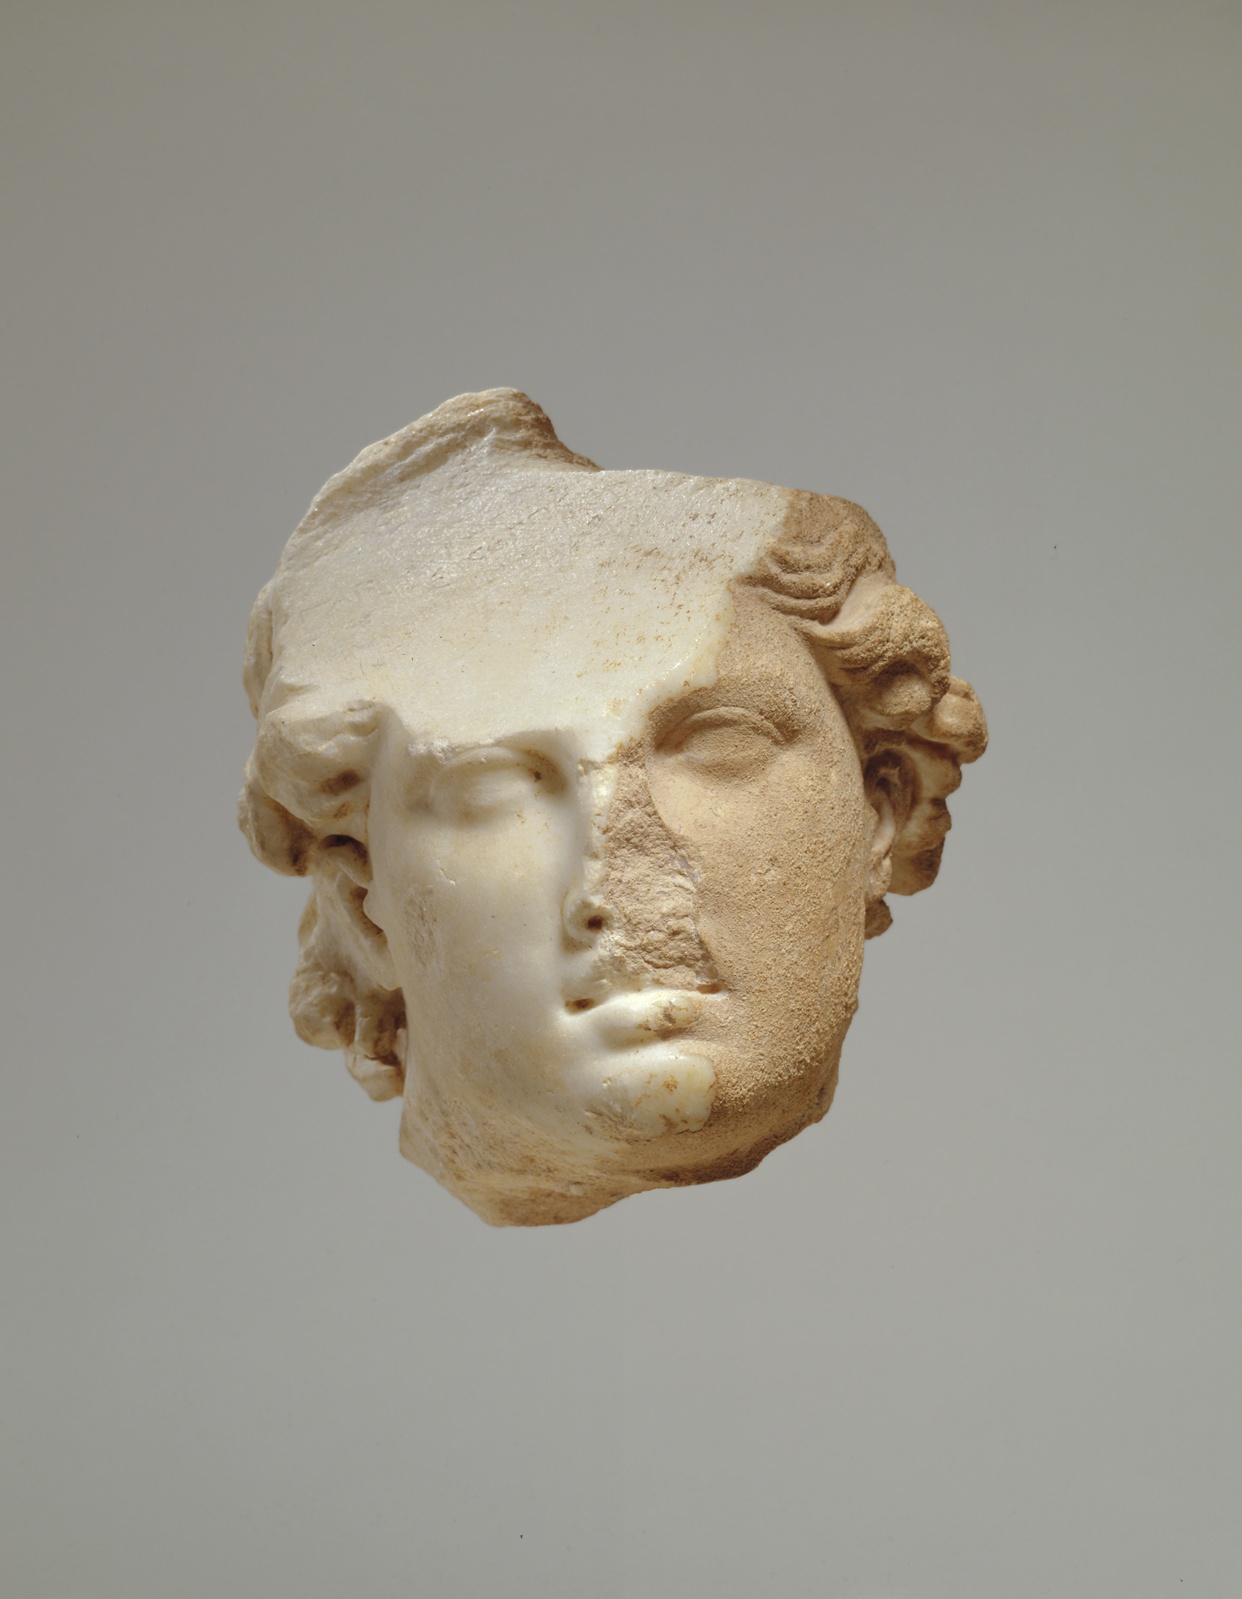 167. Portrait Of A Syrian Ruler - Hellenistic